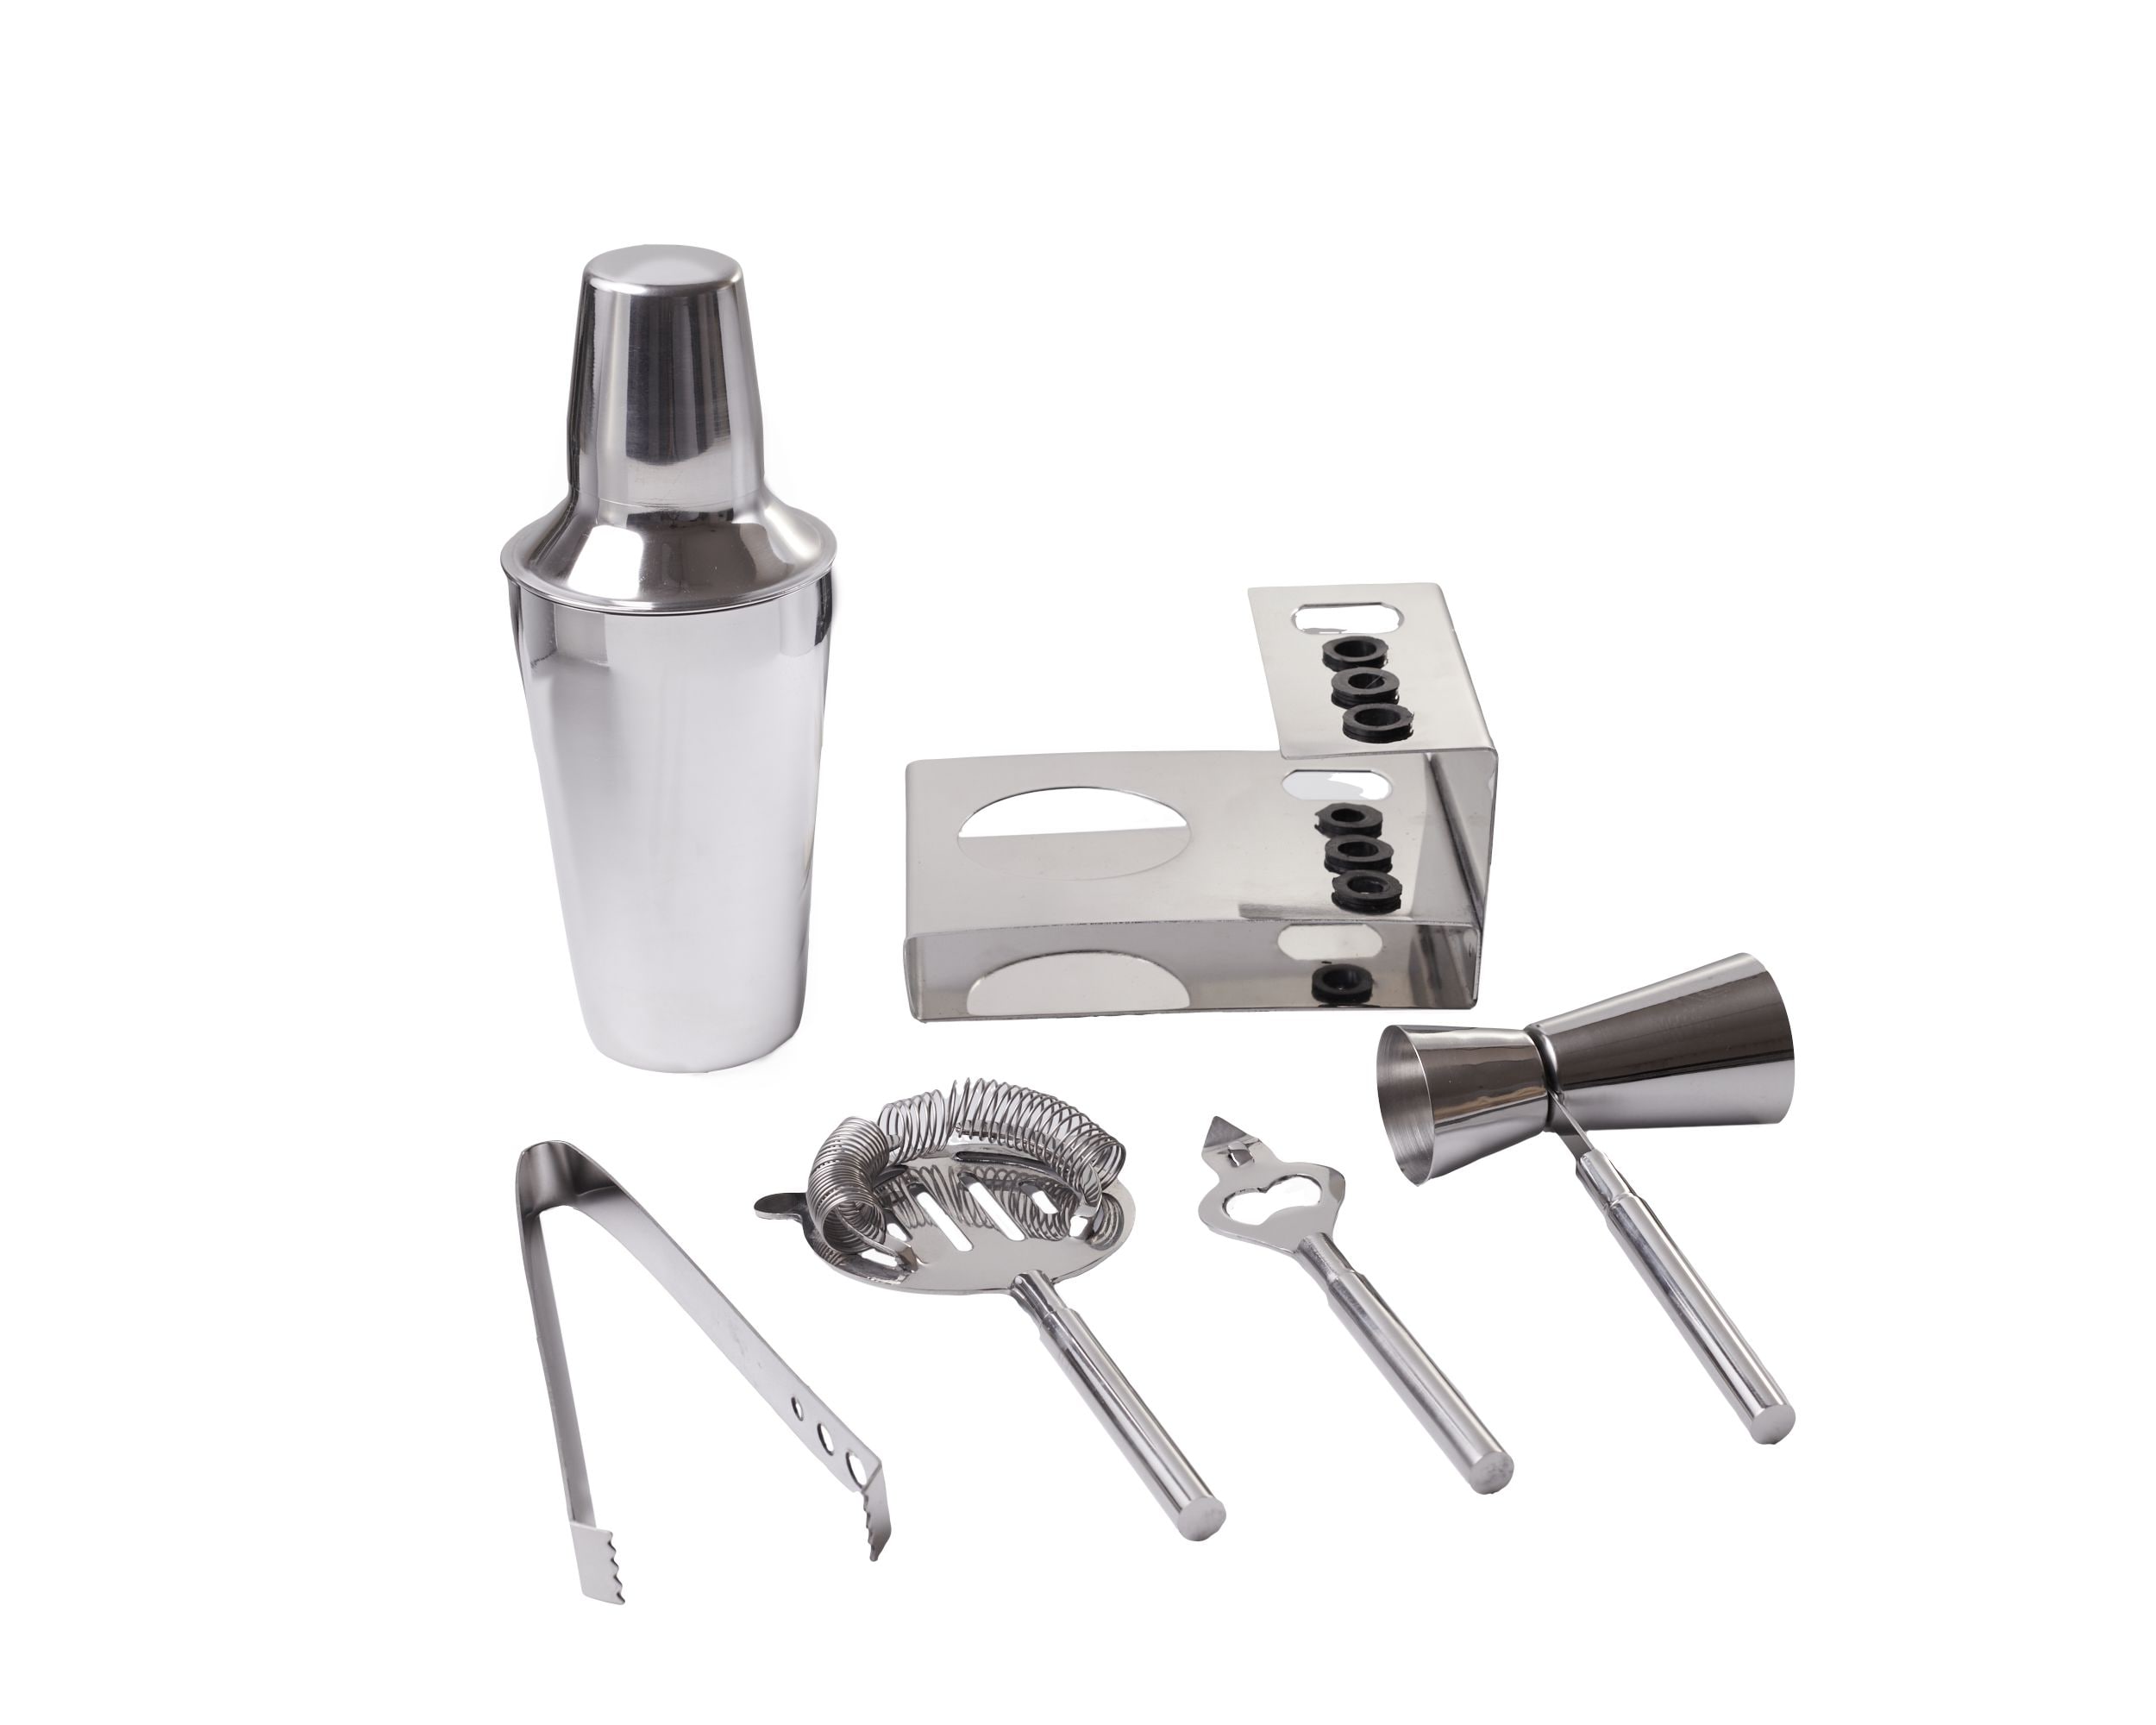 17 Ounce Cocktail Shaker Bar Set Martini Kit with Double Sizes Measuring Jigger 